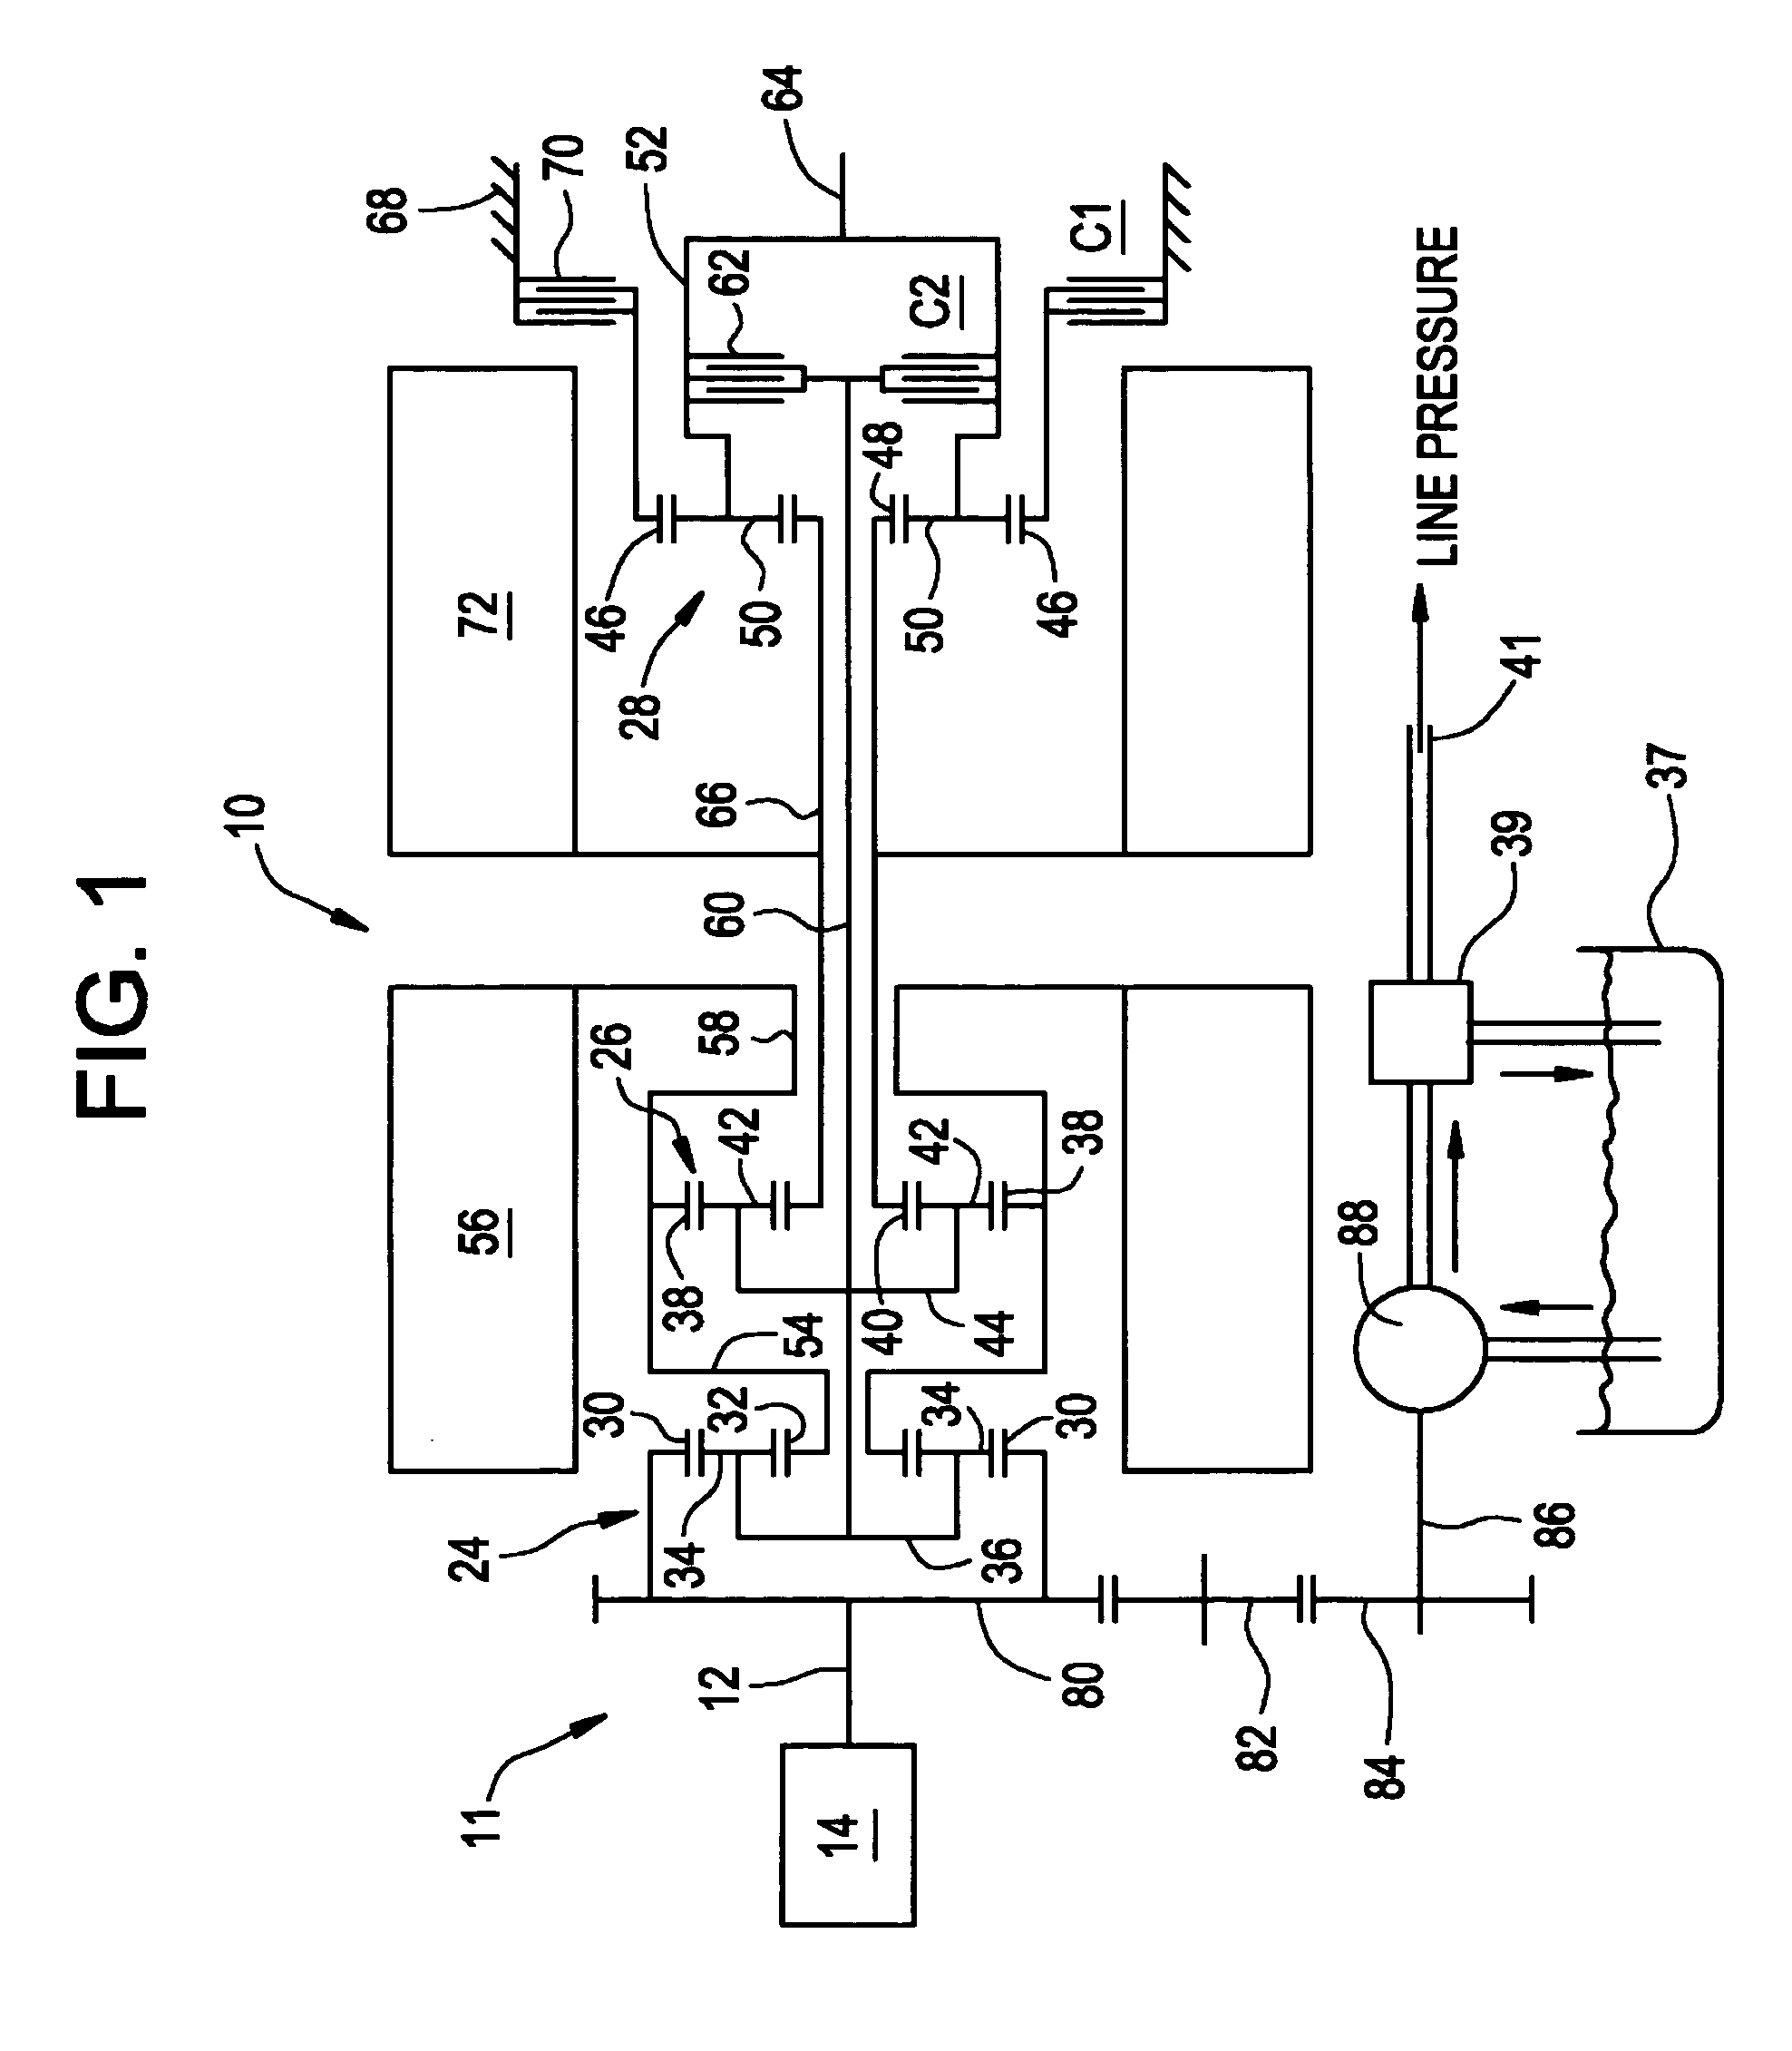 Two clutch fixed-ratio exit control for multi-mode hybrid drive